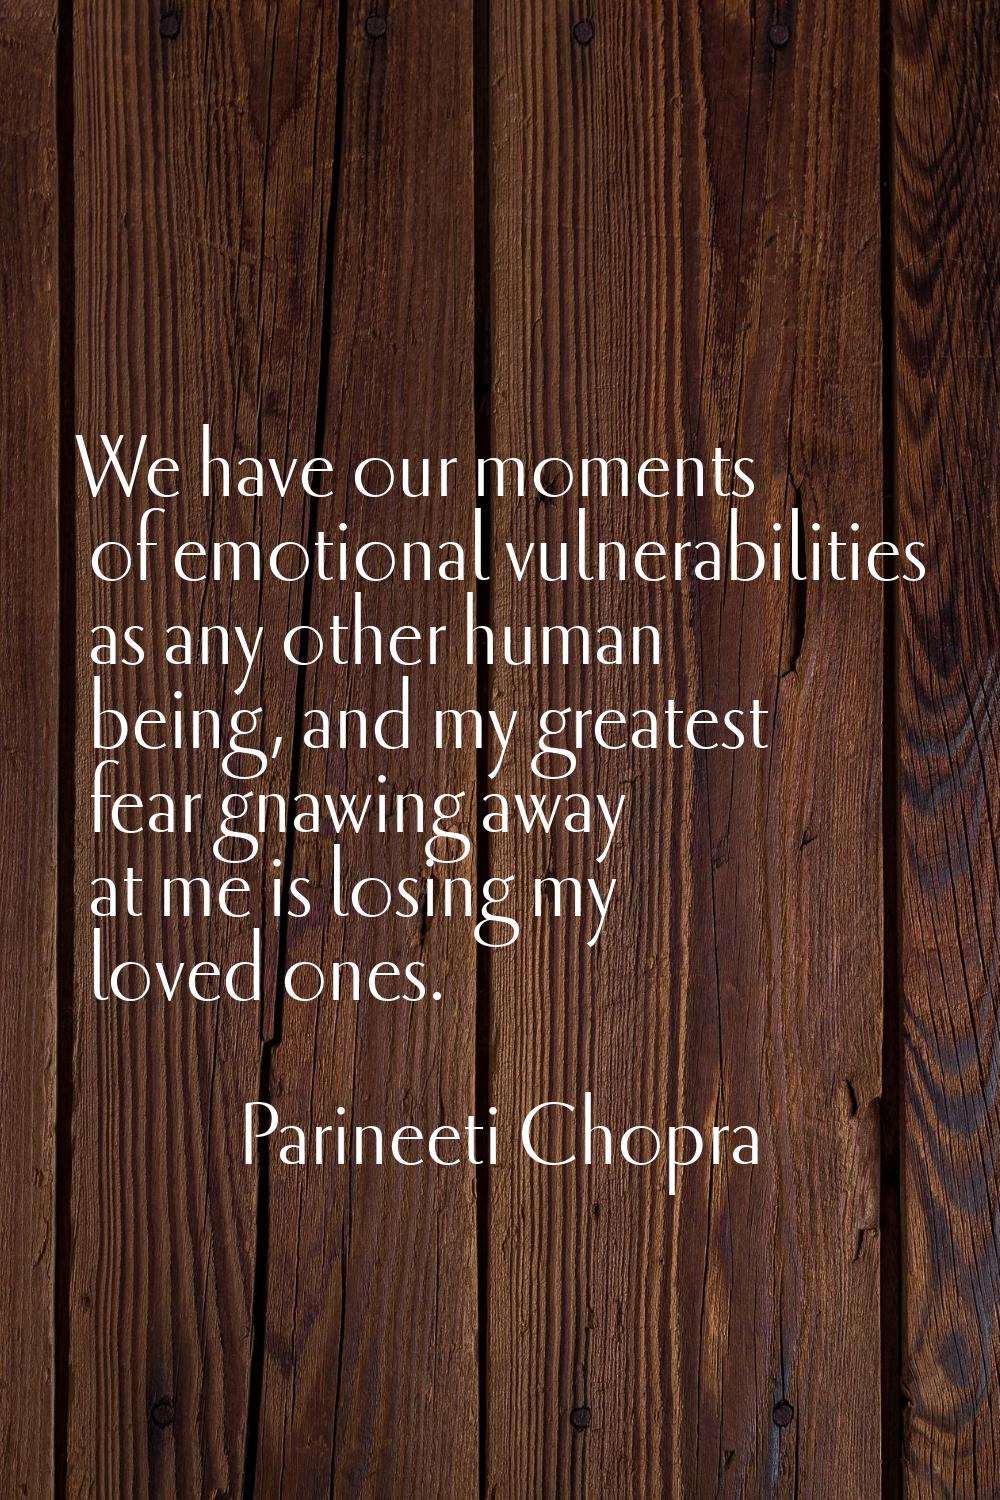 We have our moments of emotional vulnerabilities as any other human being, and my greatest fear gna